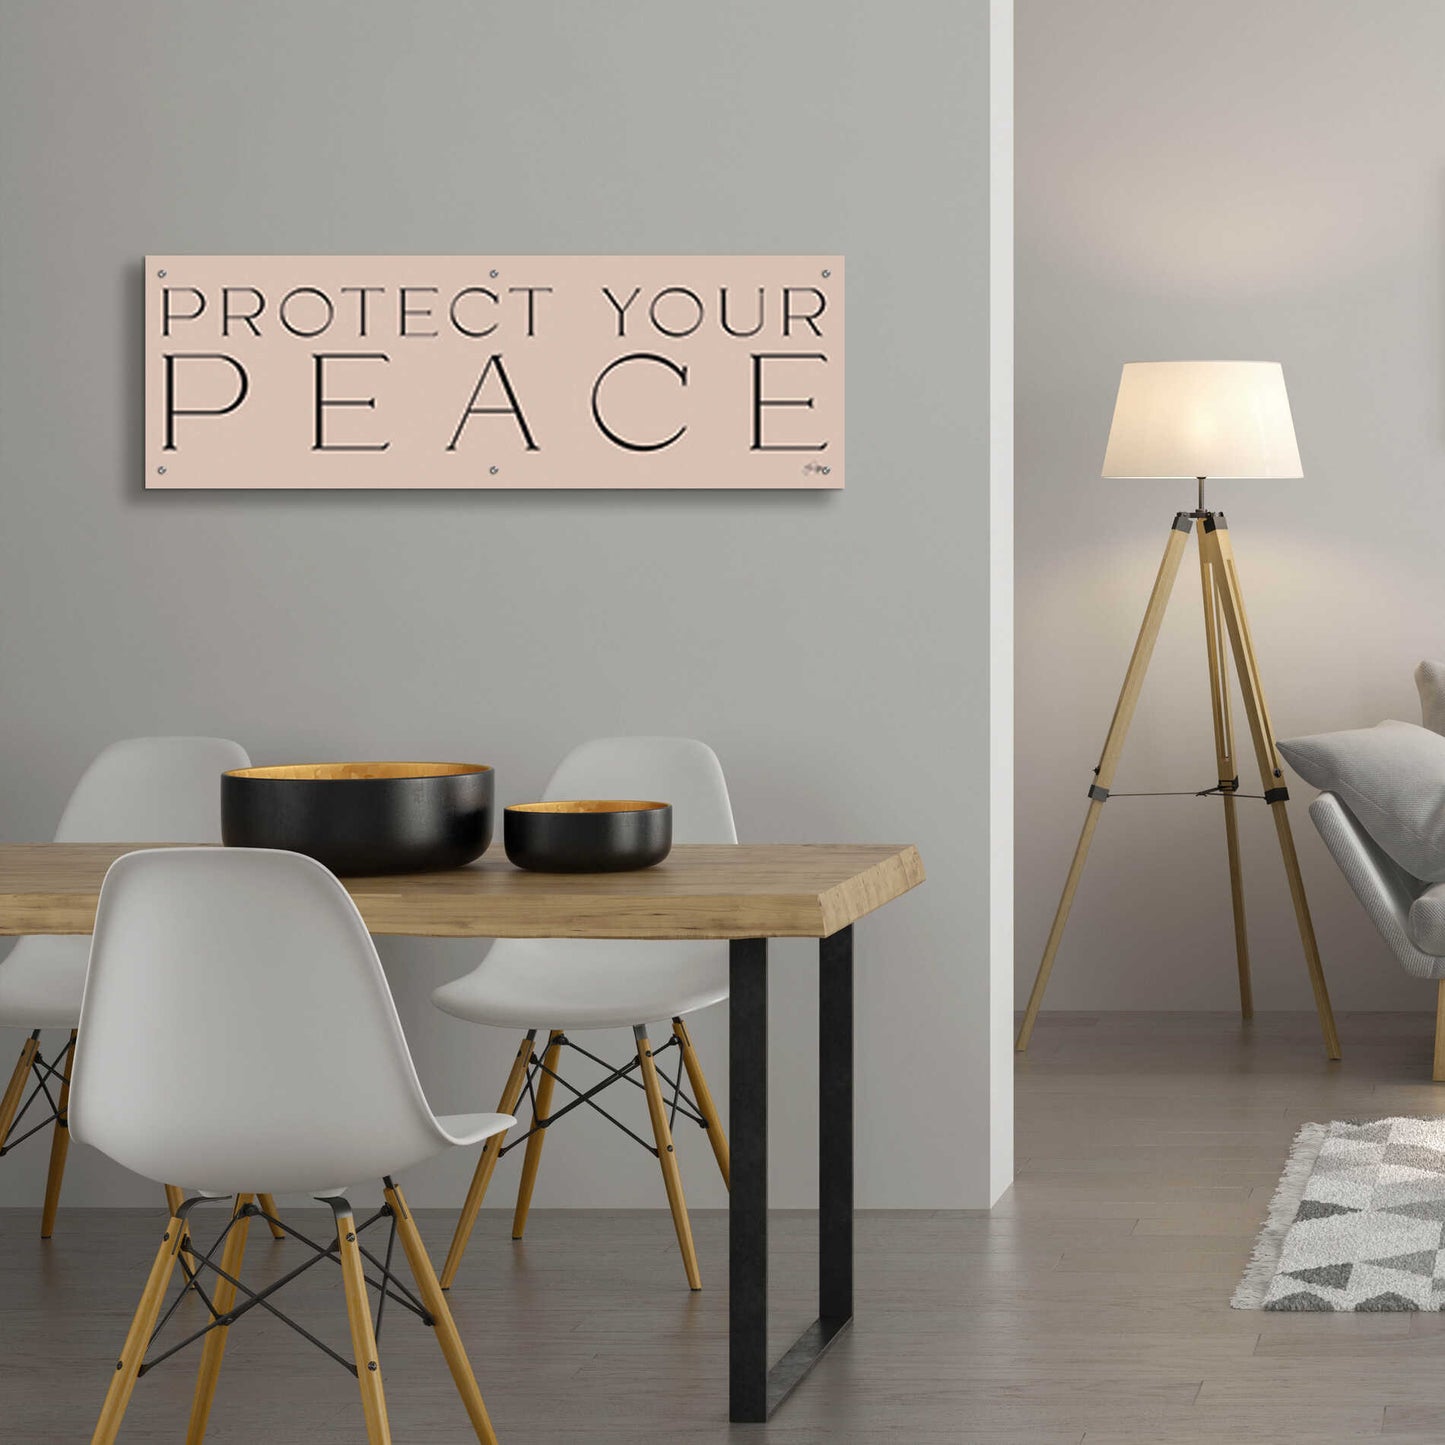 Epic Art 'Protect Your Peace' by Yass Naffas Designs, Acrylic Glass Wall Art,48x16